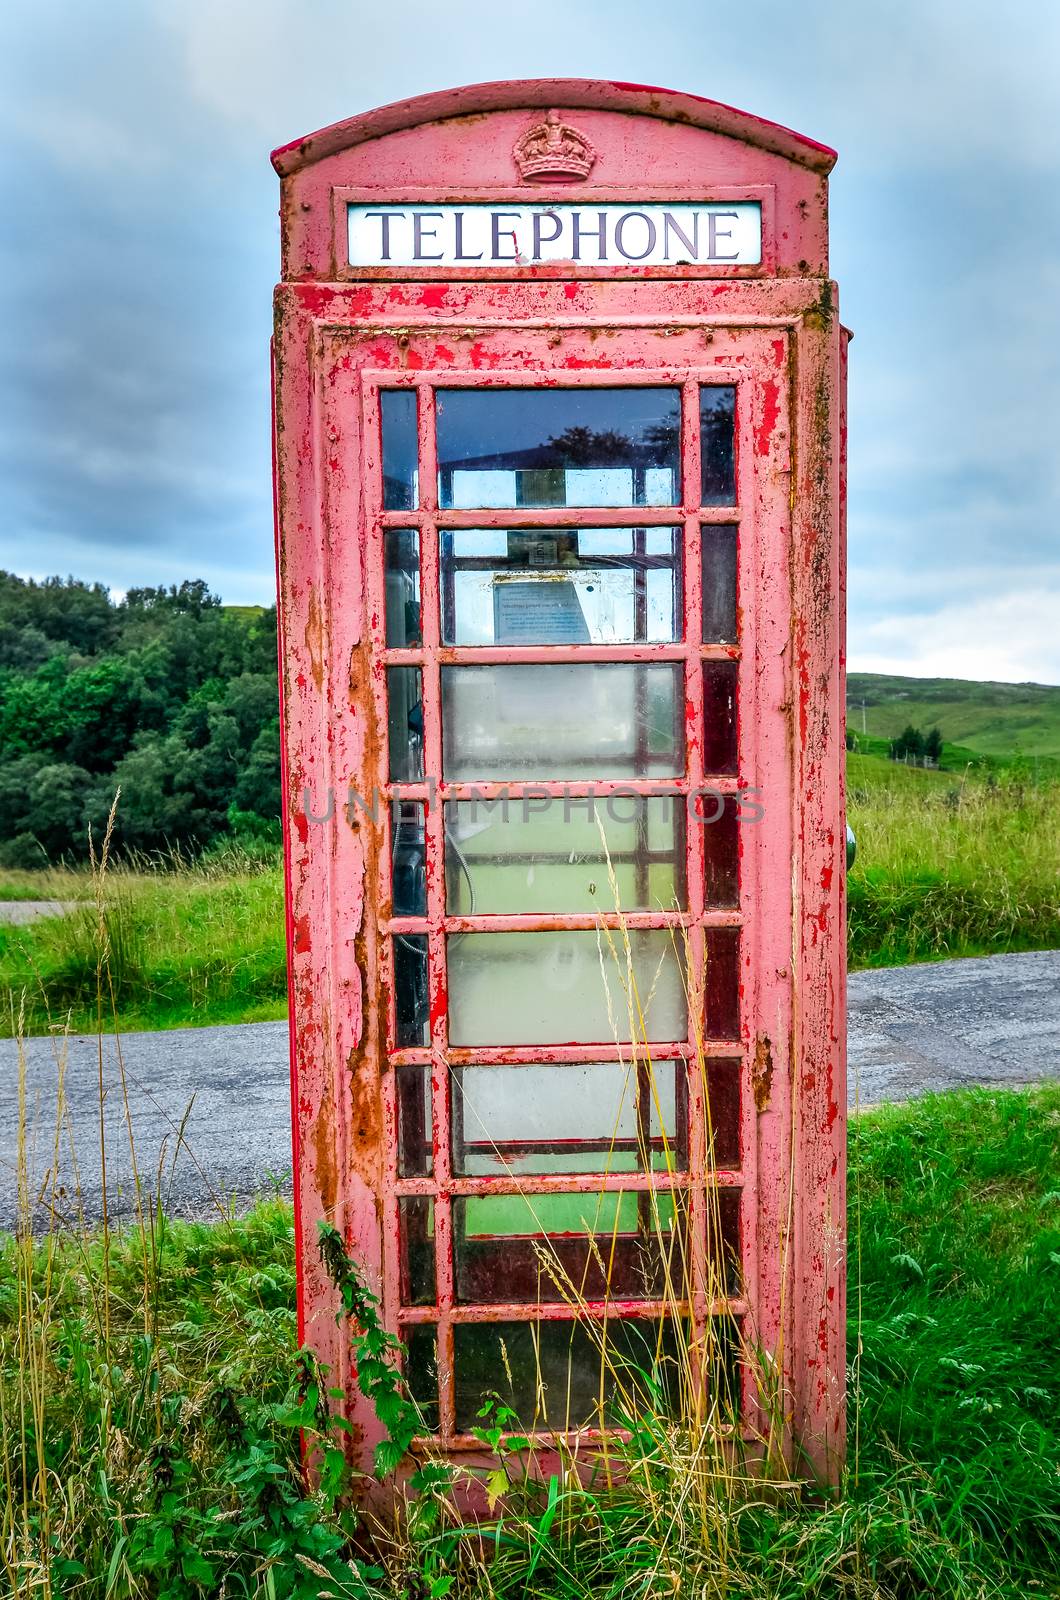 Detail of old red English phone booth in countryside, United Kingdom